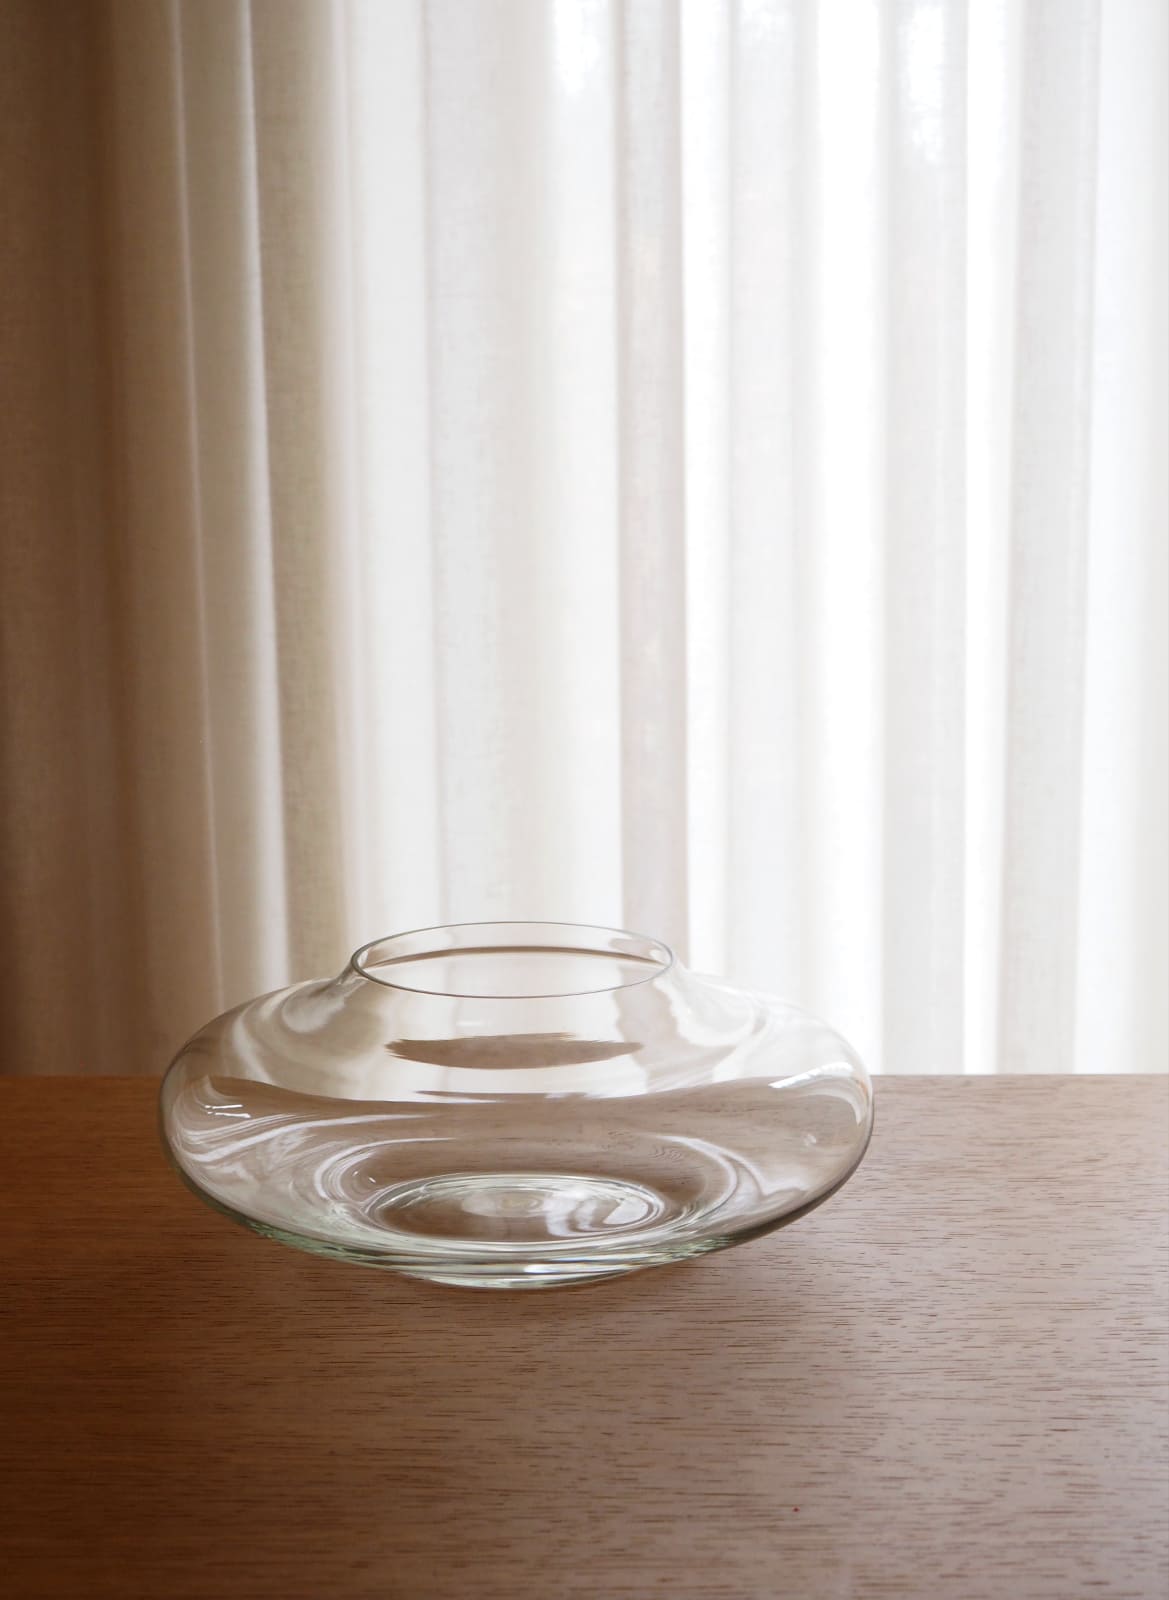 glass bowl standing on a wooden table